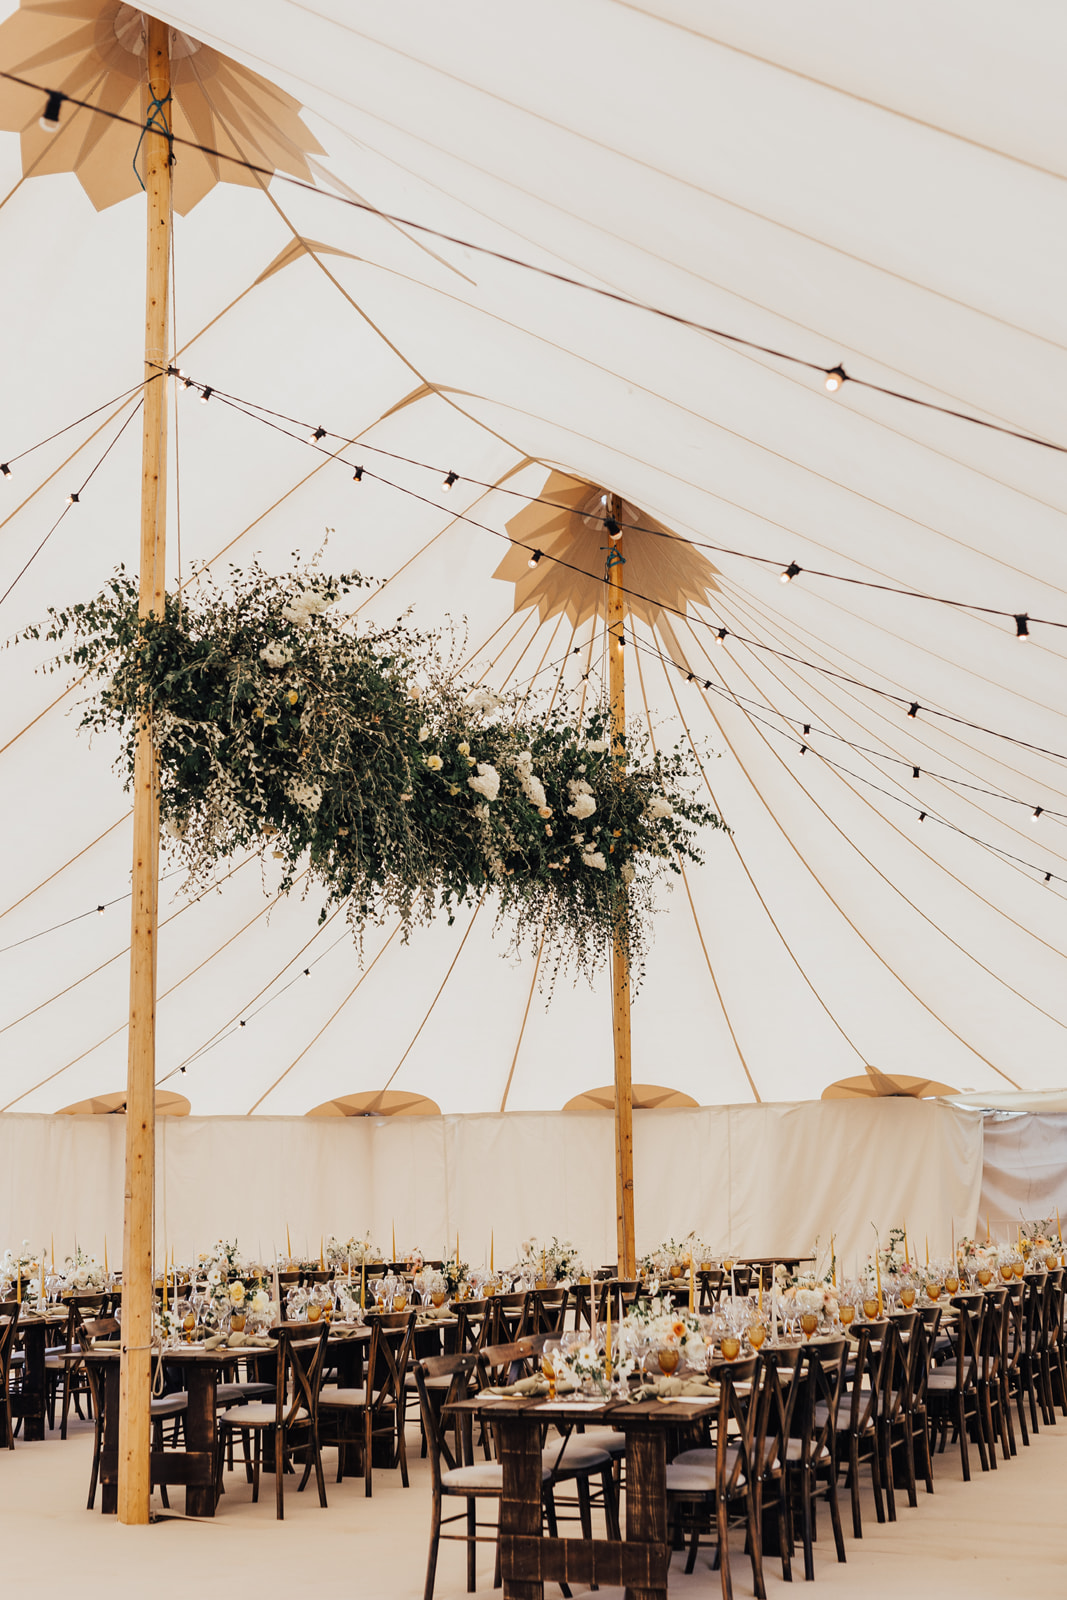 Lora & Dave's Garden Sperry Tent Wedding dining decor, by Natalie Hewitt & Joseph Benjamin Marquees Images by Rebecca Carpenter Photography